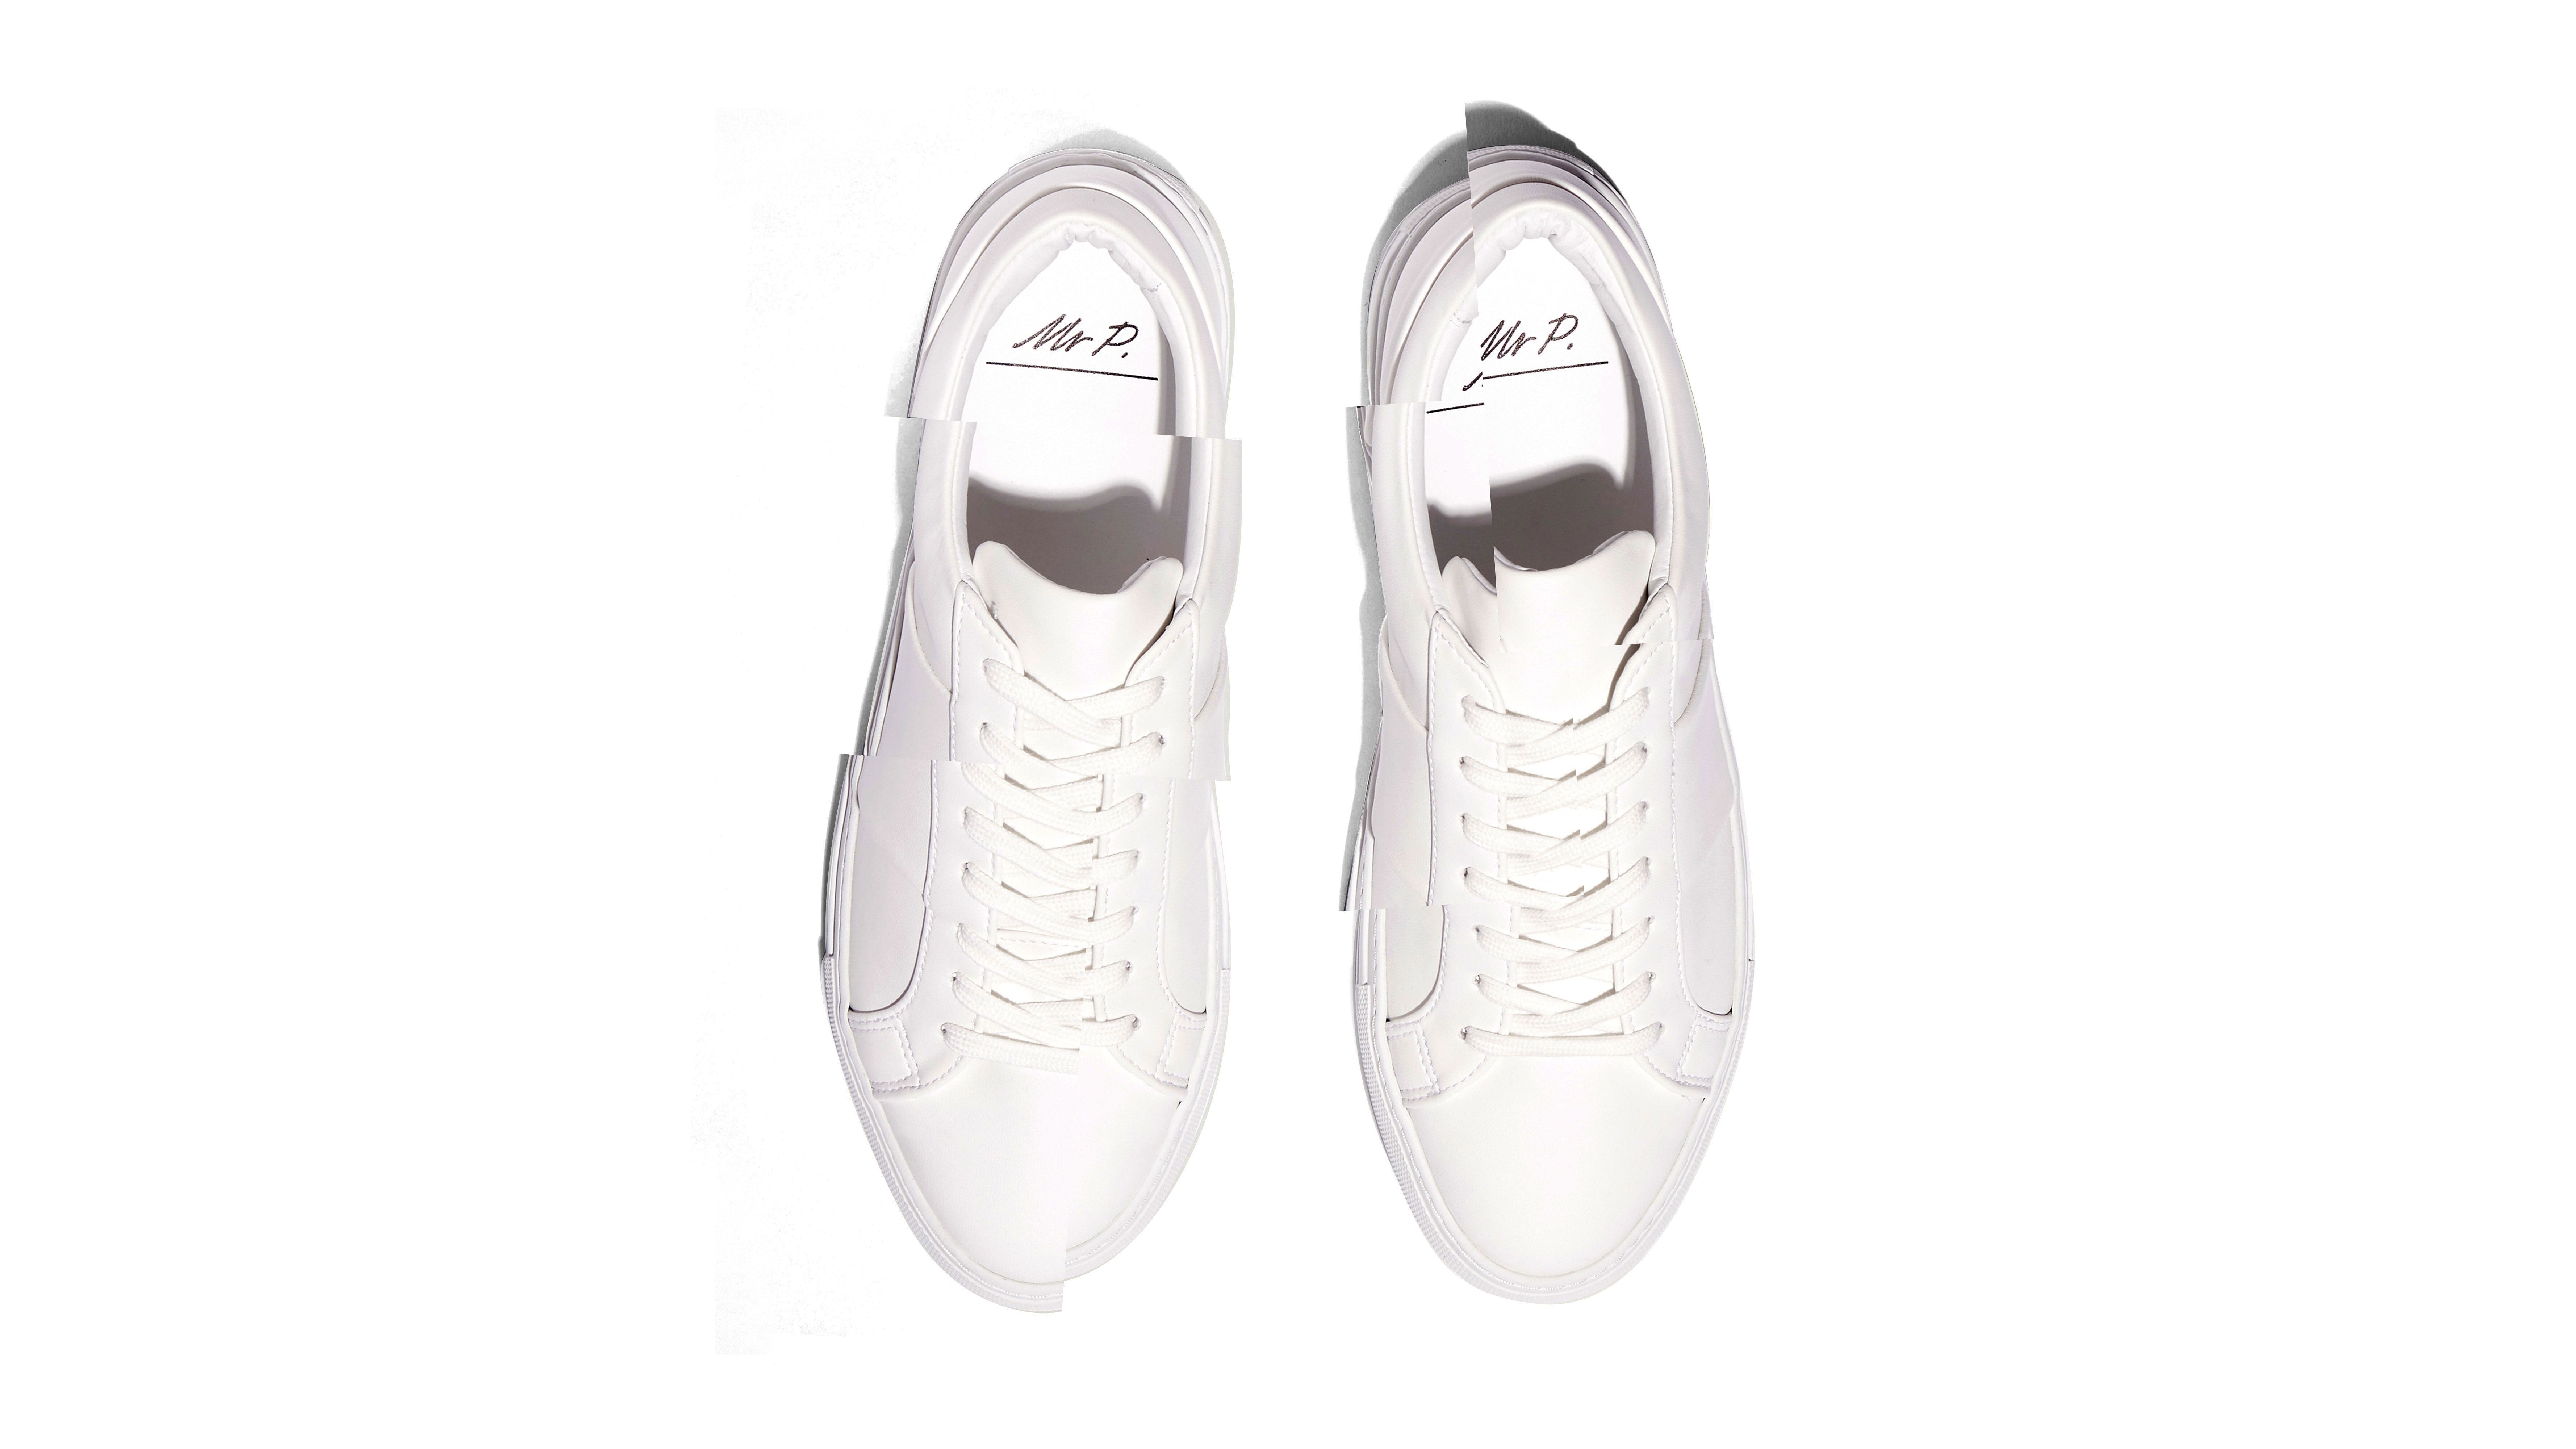 In Review: The Banana Republic Nicklas White Leather Sneaker